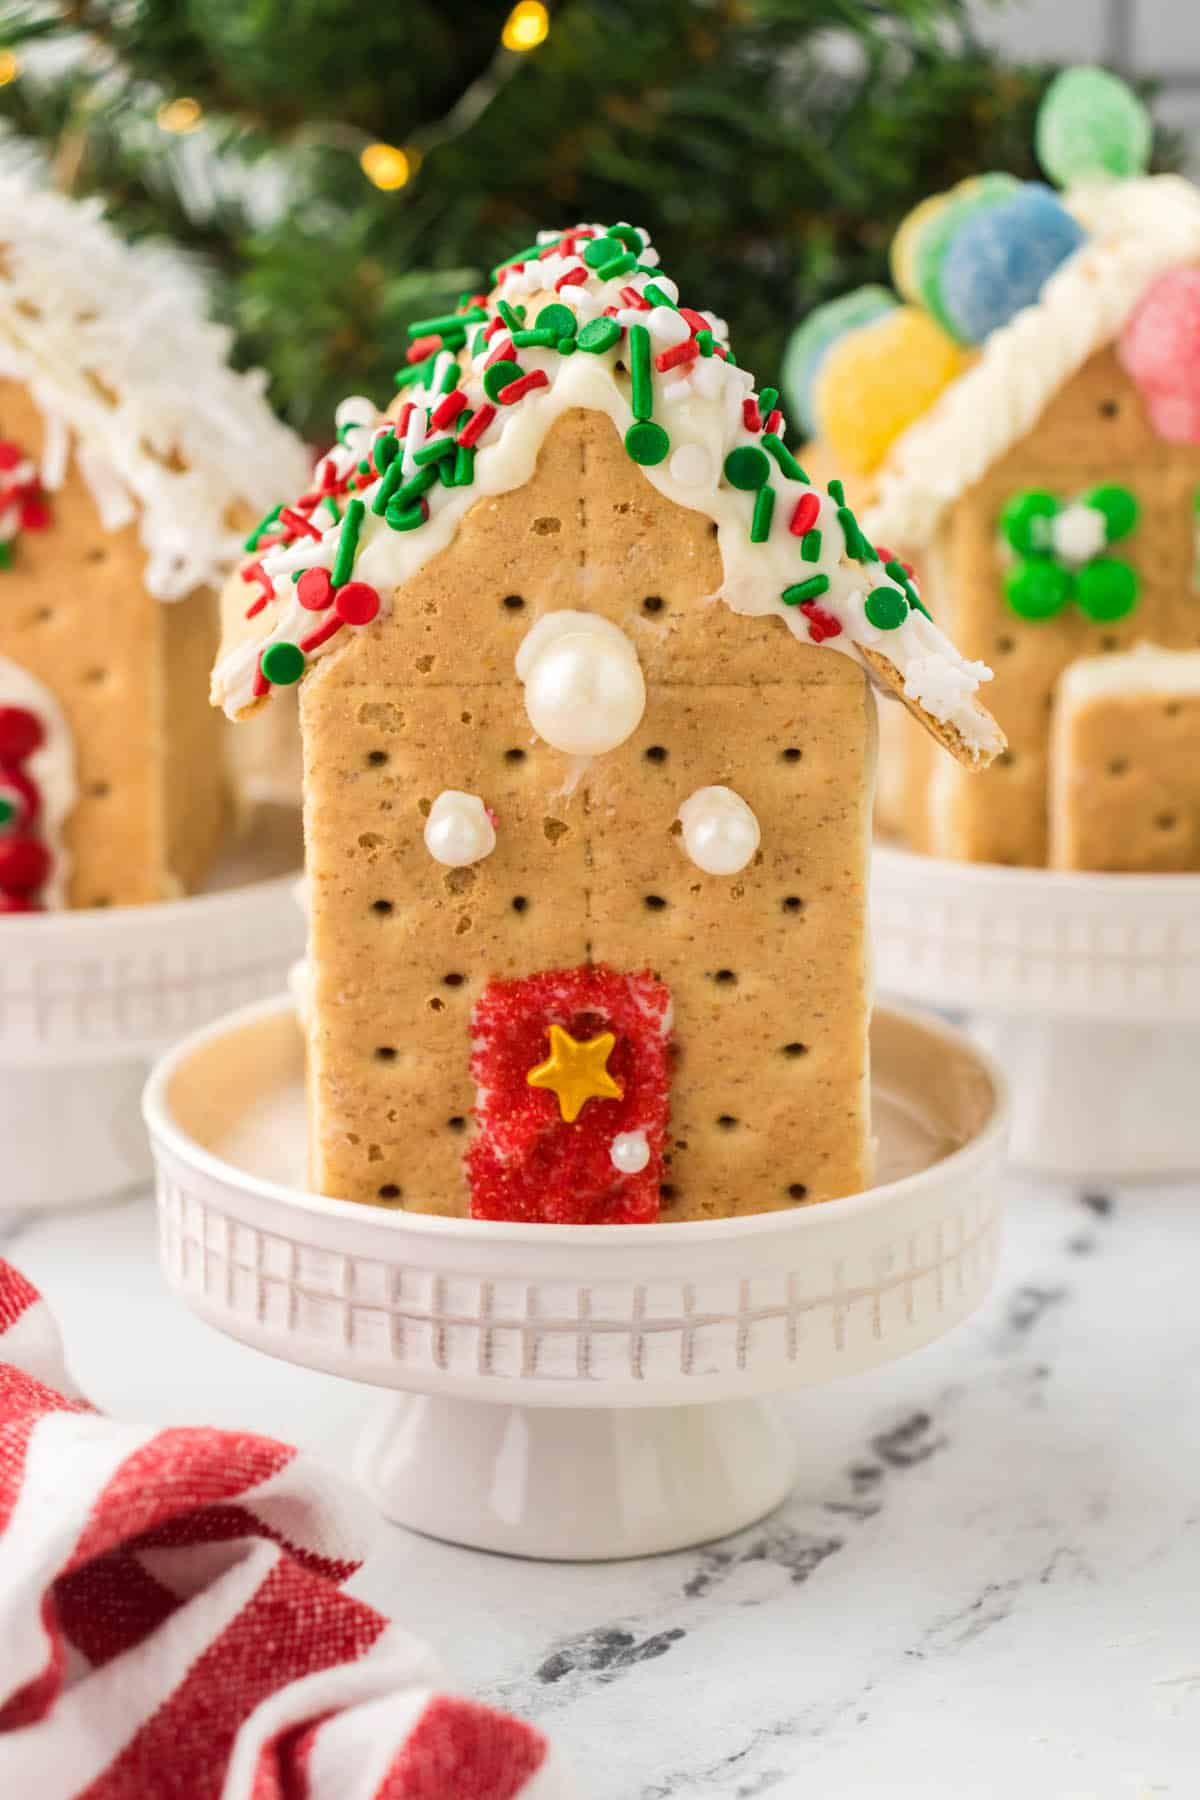 Pretty Graham Cracker Gingerbread Houses decorated for the holiday season.